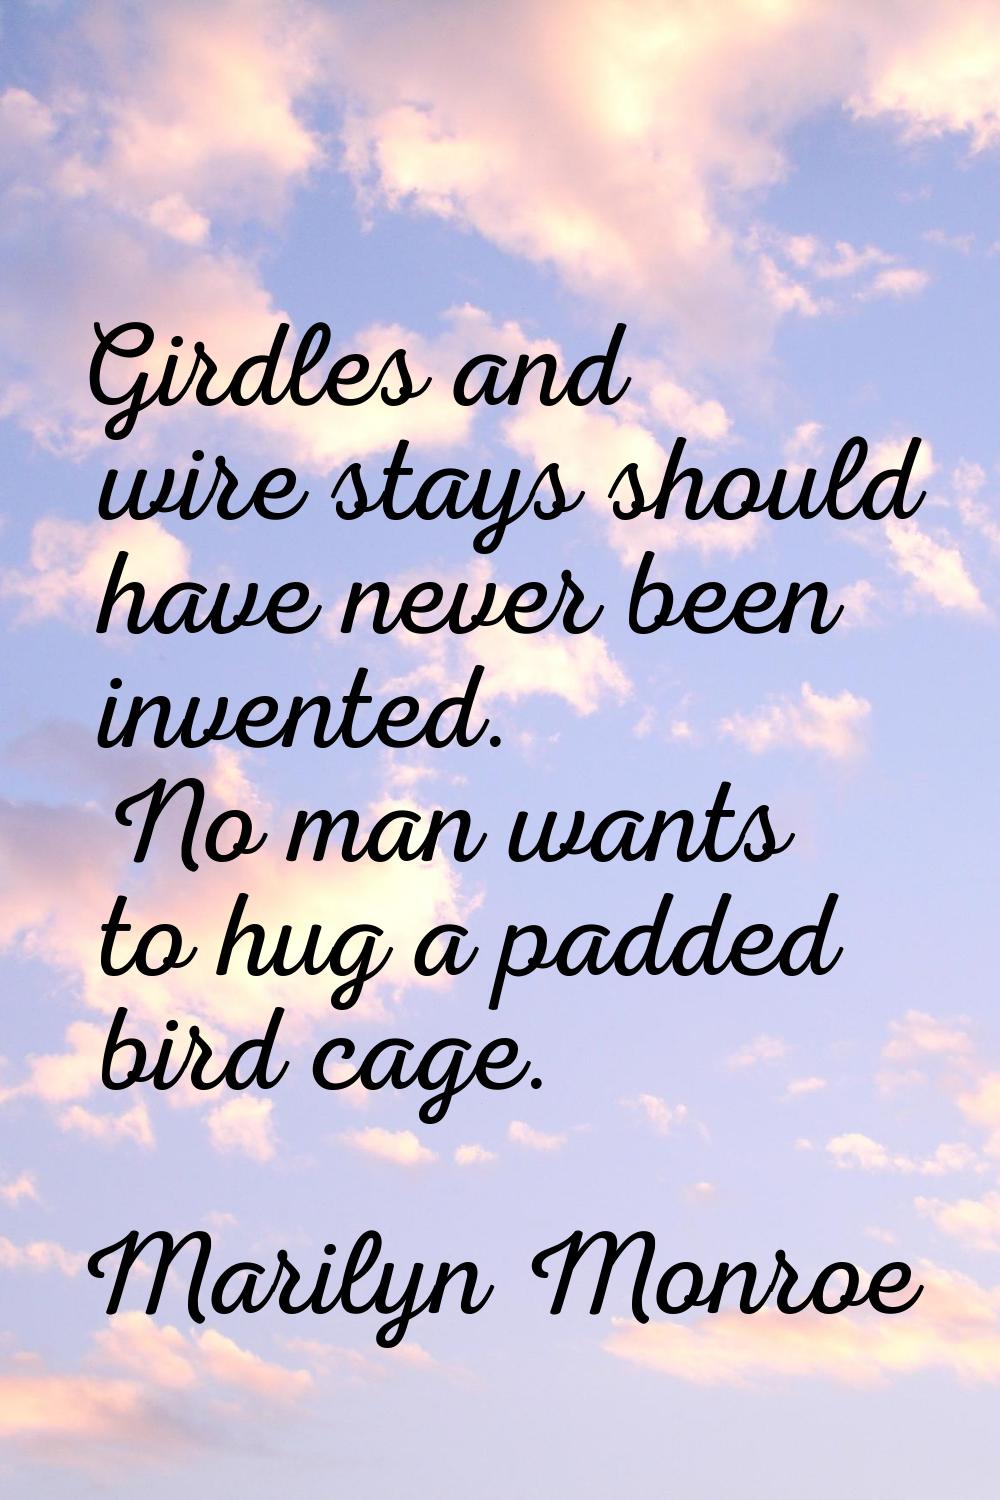 Girdles and wire stays should have never been invented. No man wants to hug a padded bird cage.